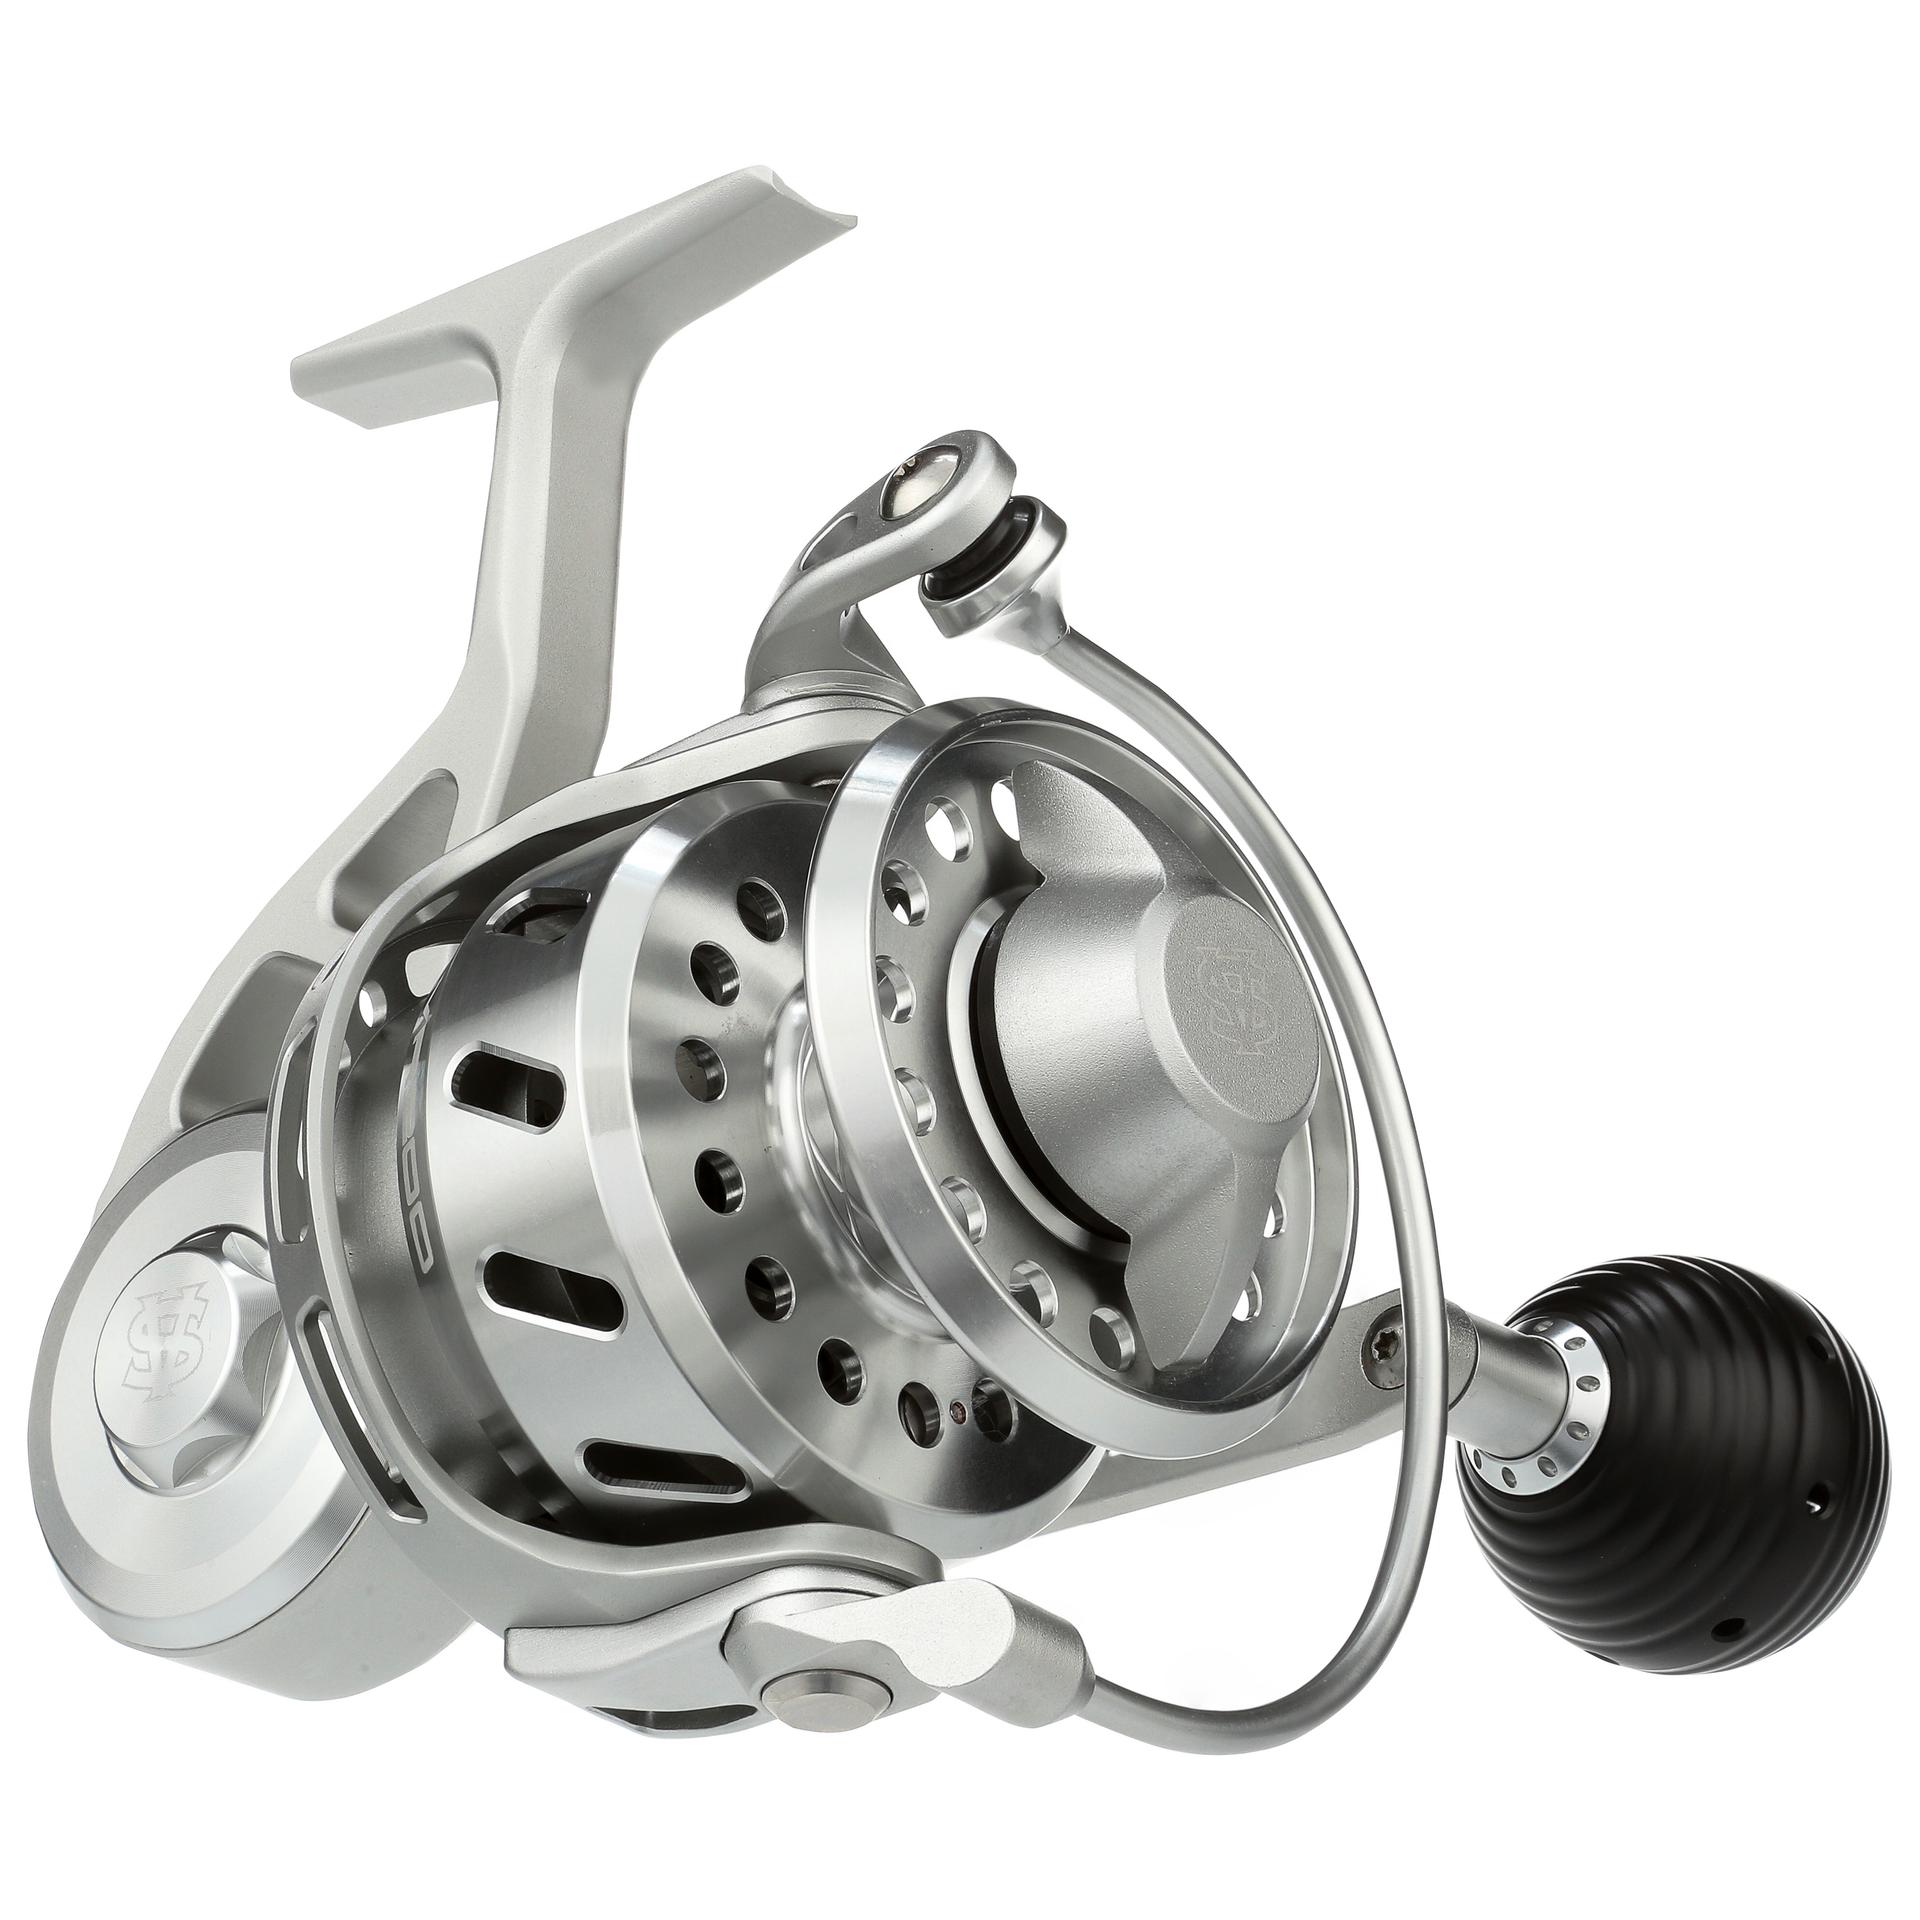 Van Staal VR75 Spinning Reels are back in stock. This is definitely one of  those reels. 